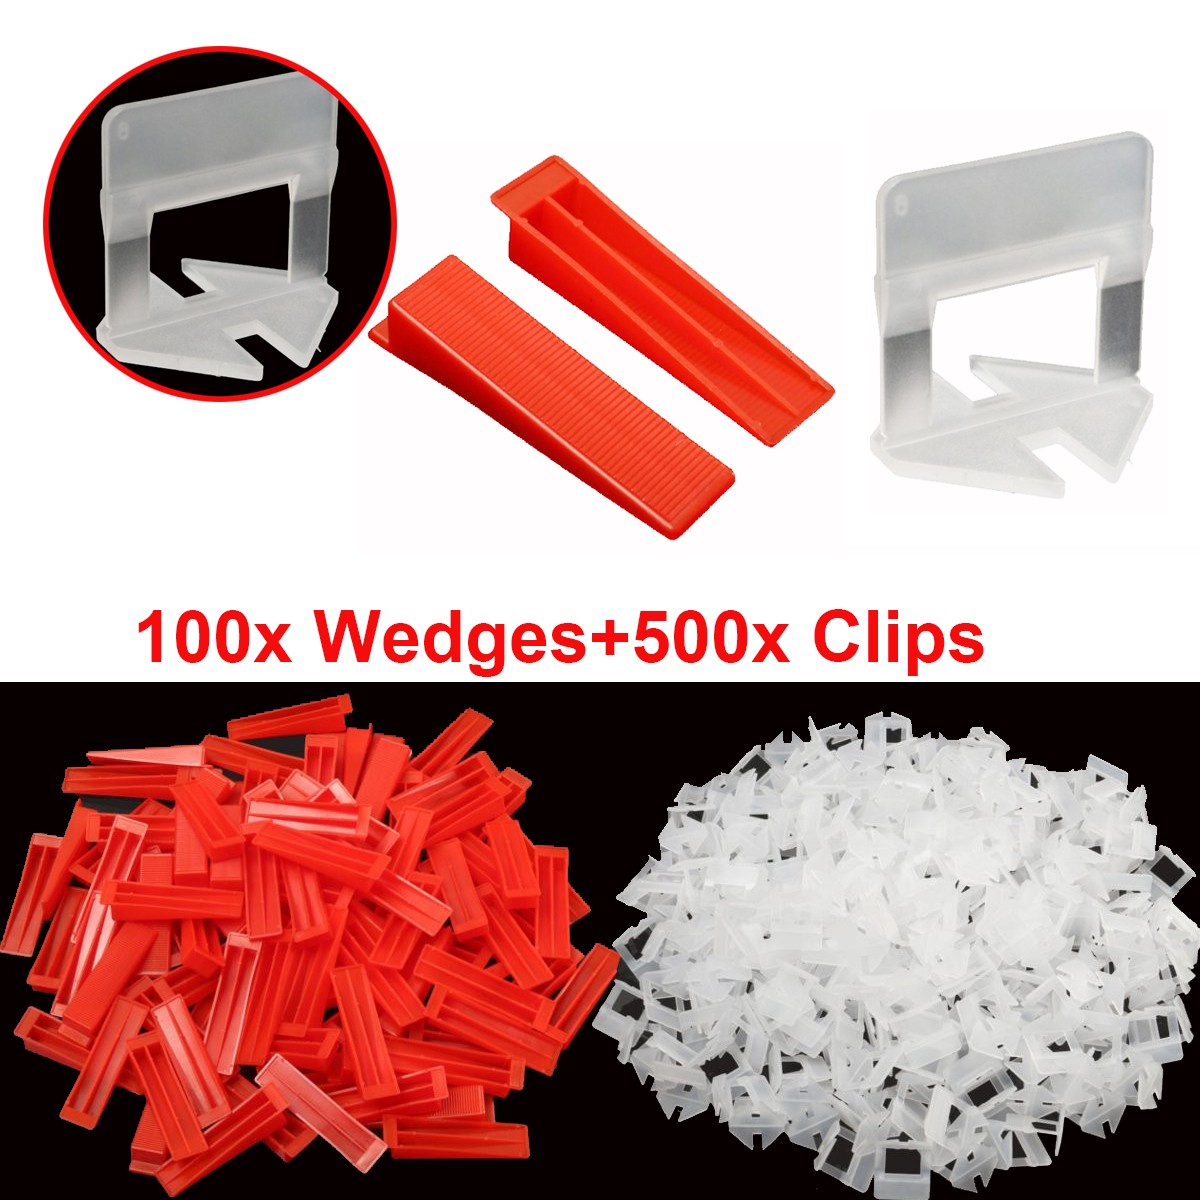 600-Tile-Leveling-System-Wedges-and-Clips-Spacer-Plastic-Tiling-Tools-1121739-1